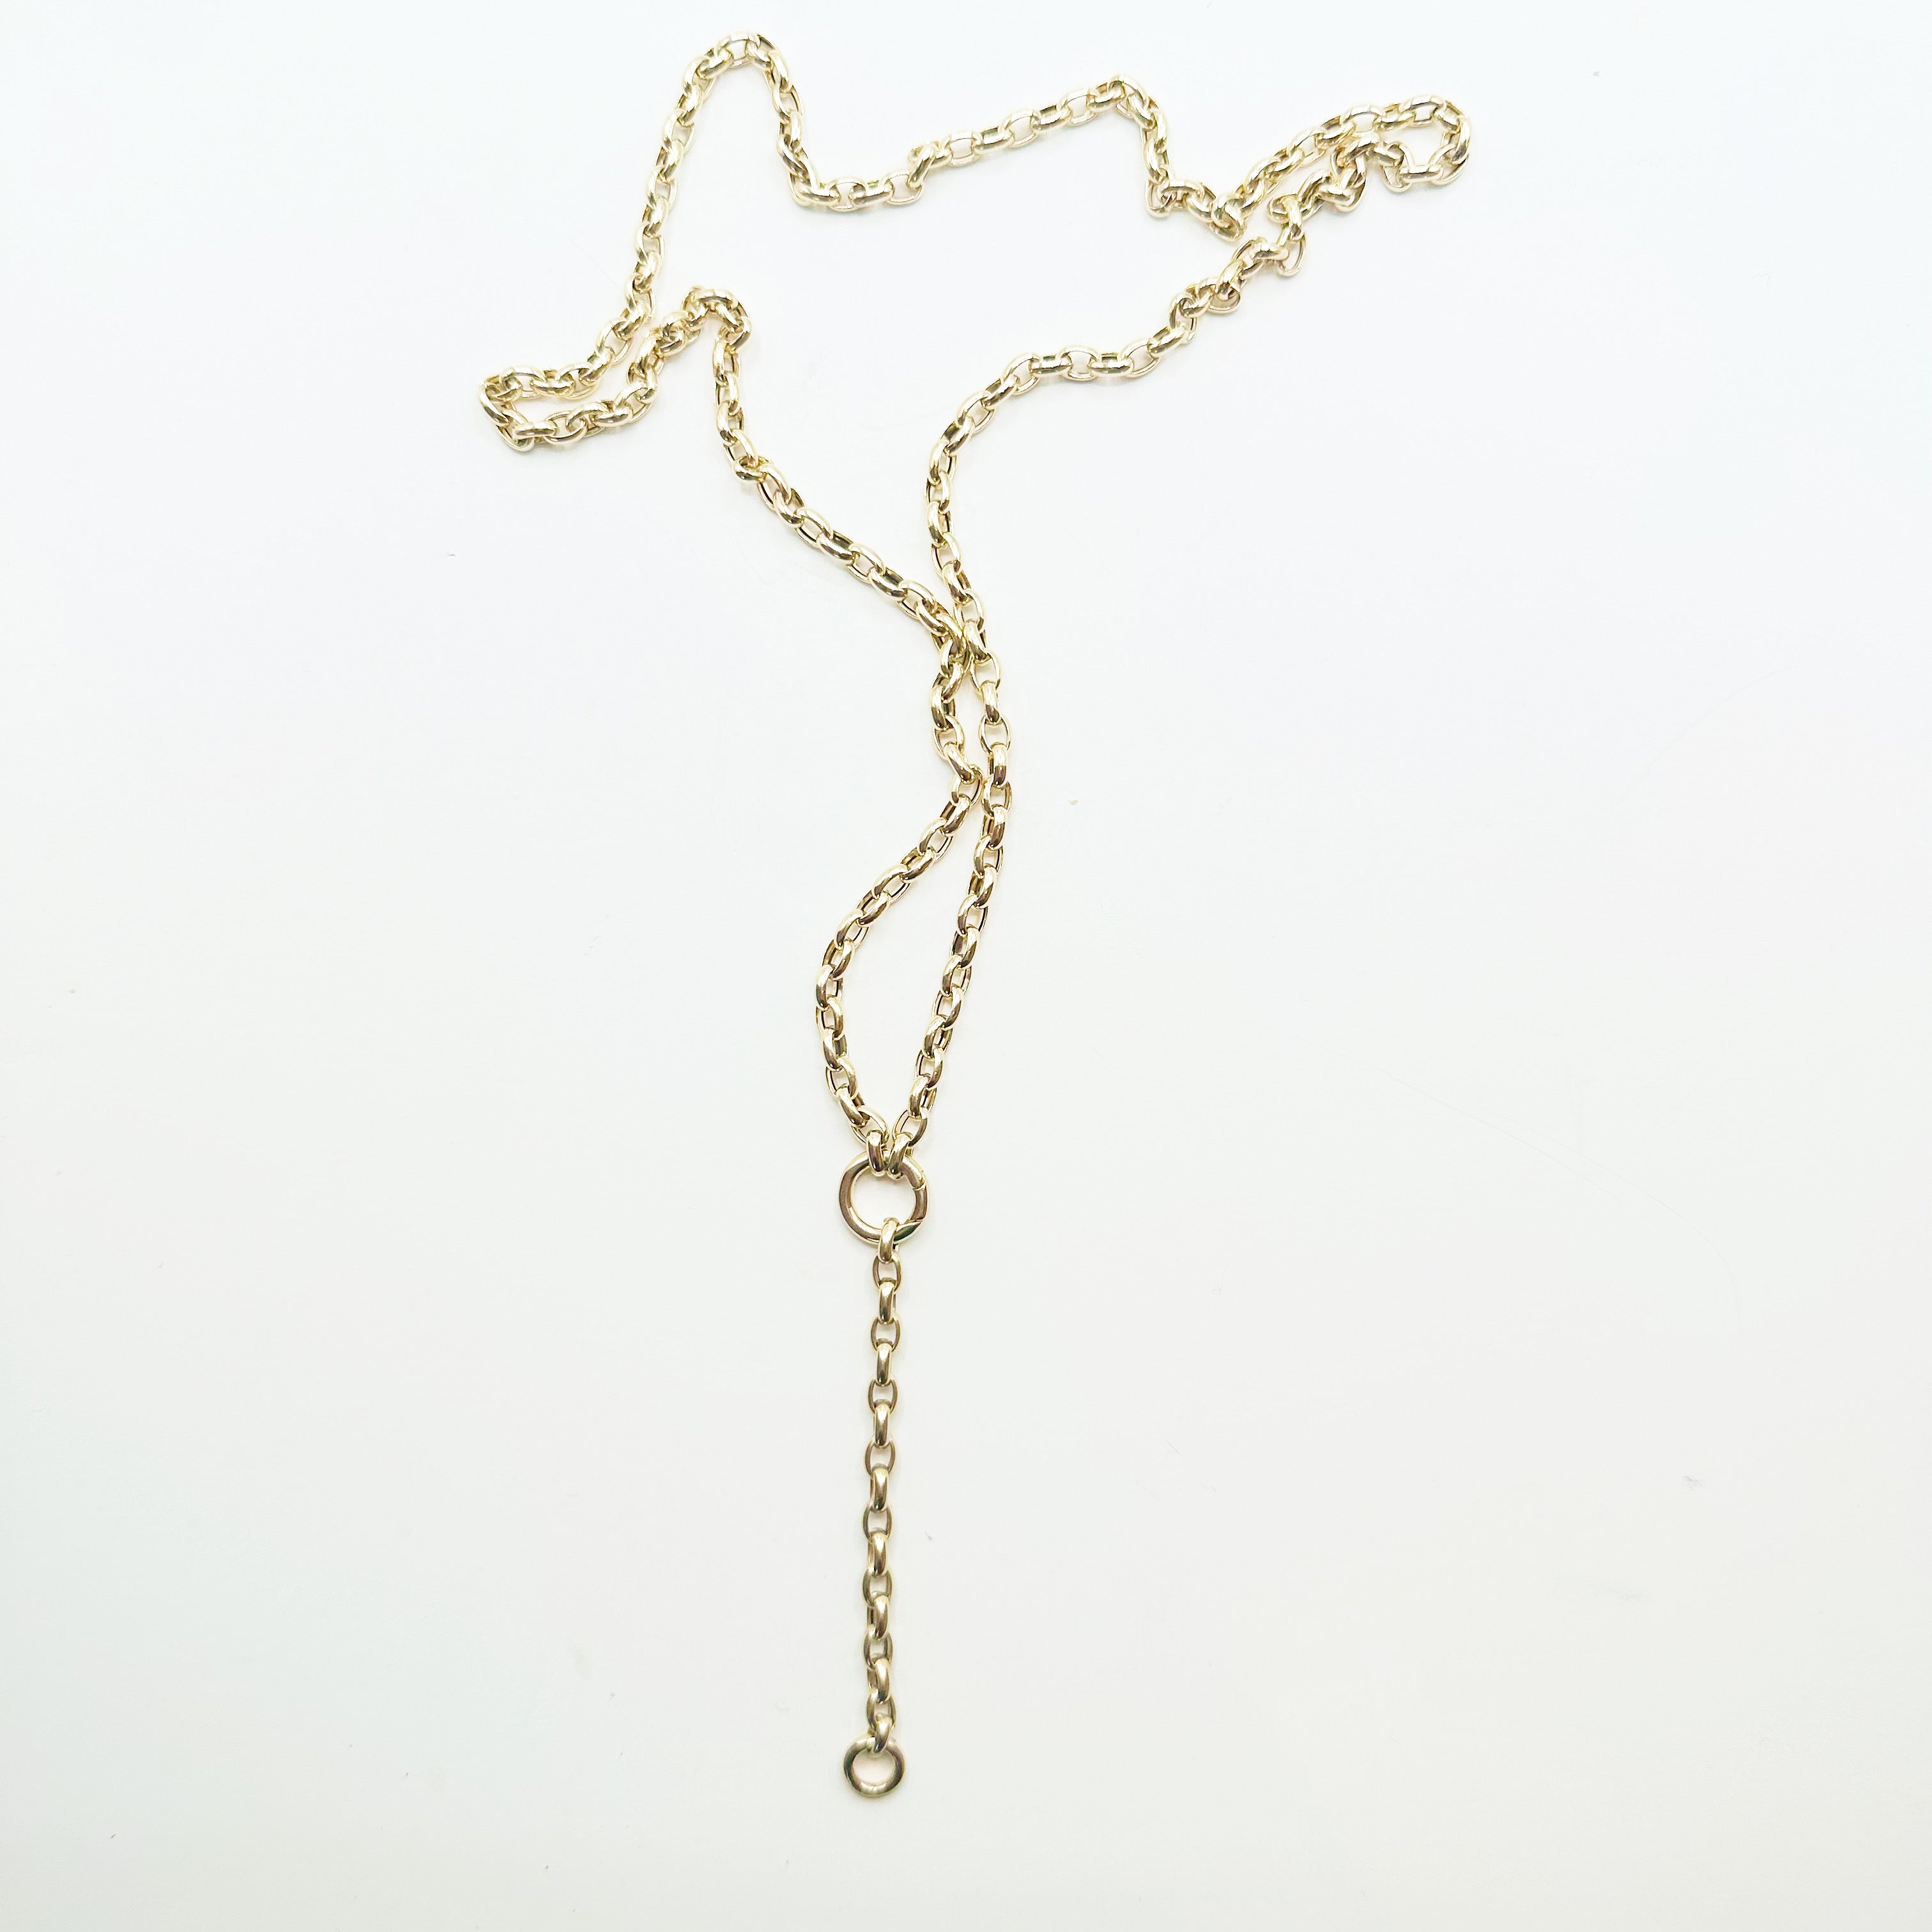 14K GOLD CHAIN NECKLACE WITH CHARM HOLDERS